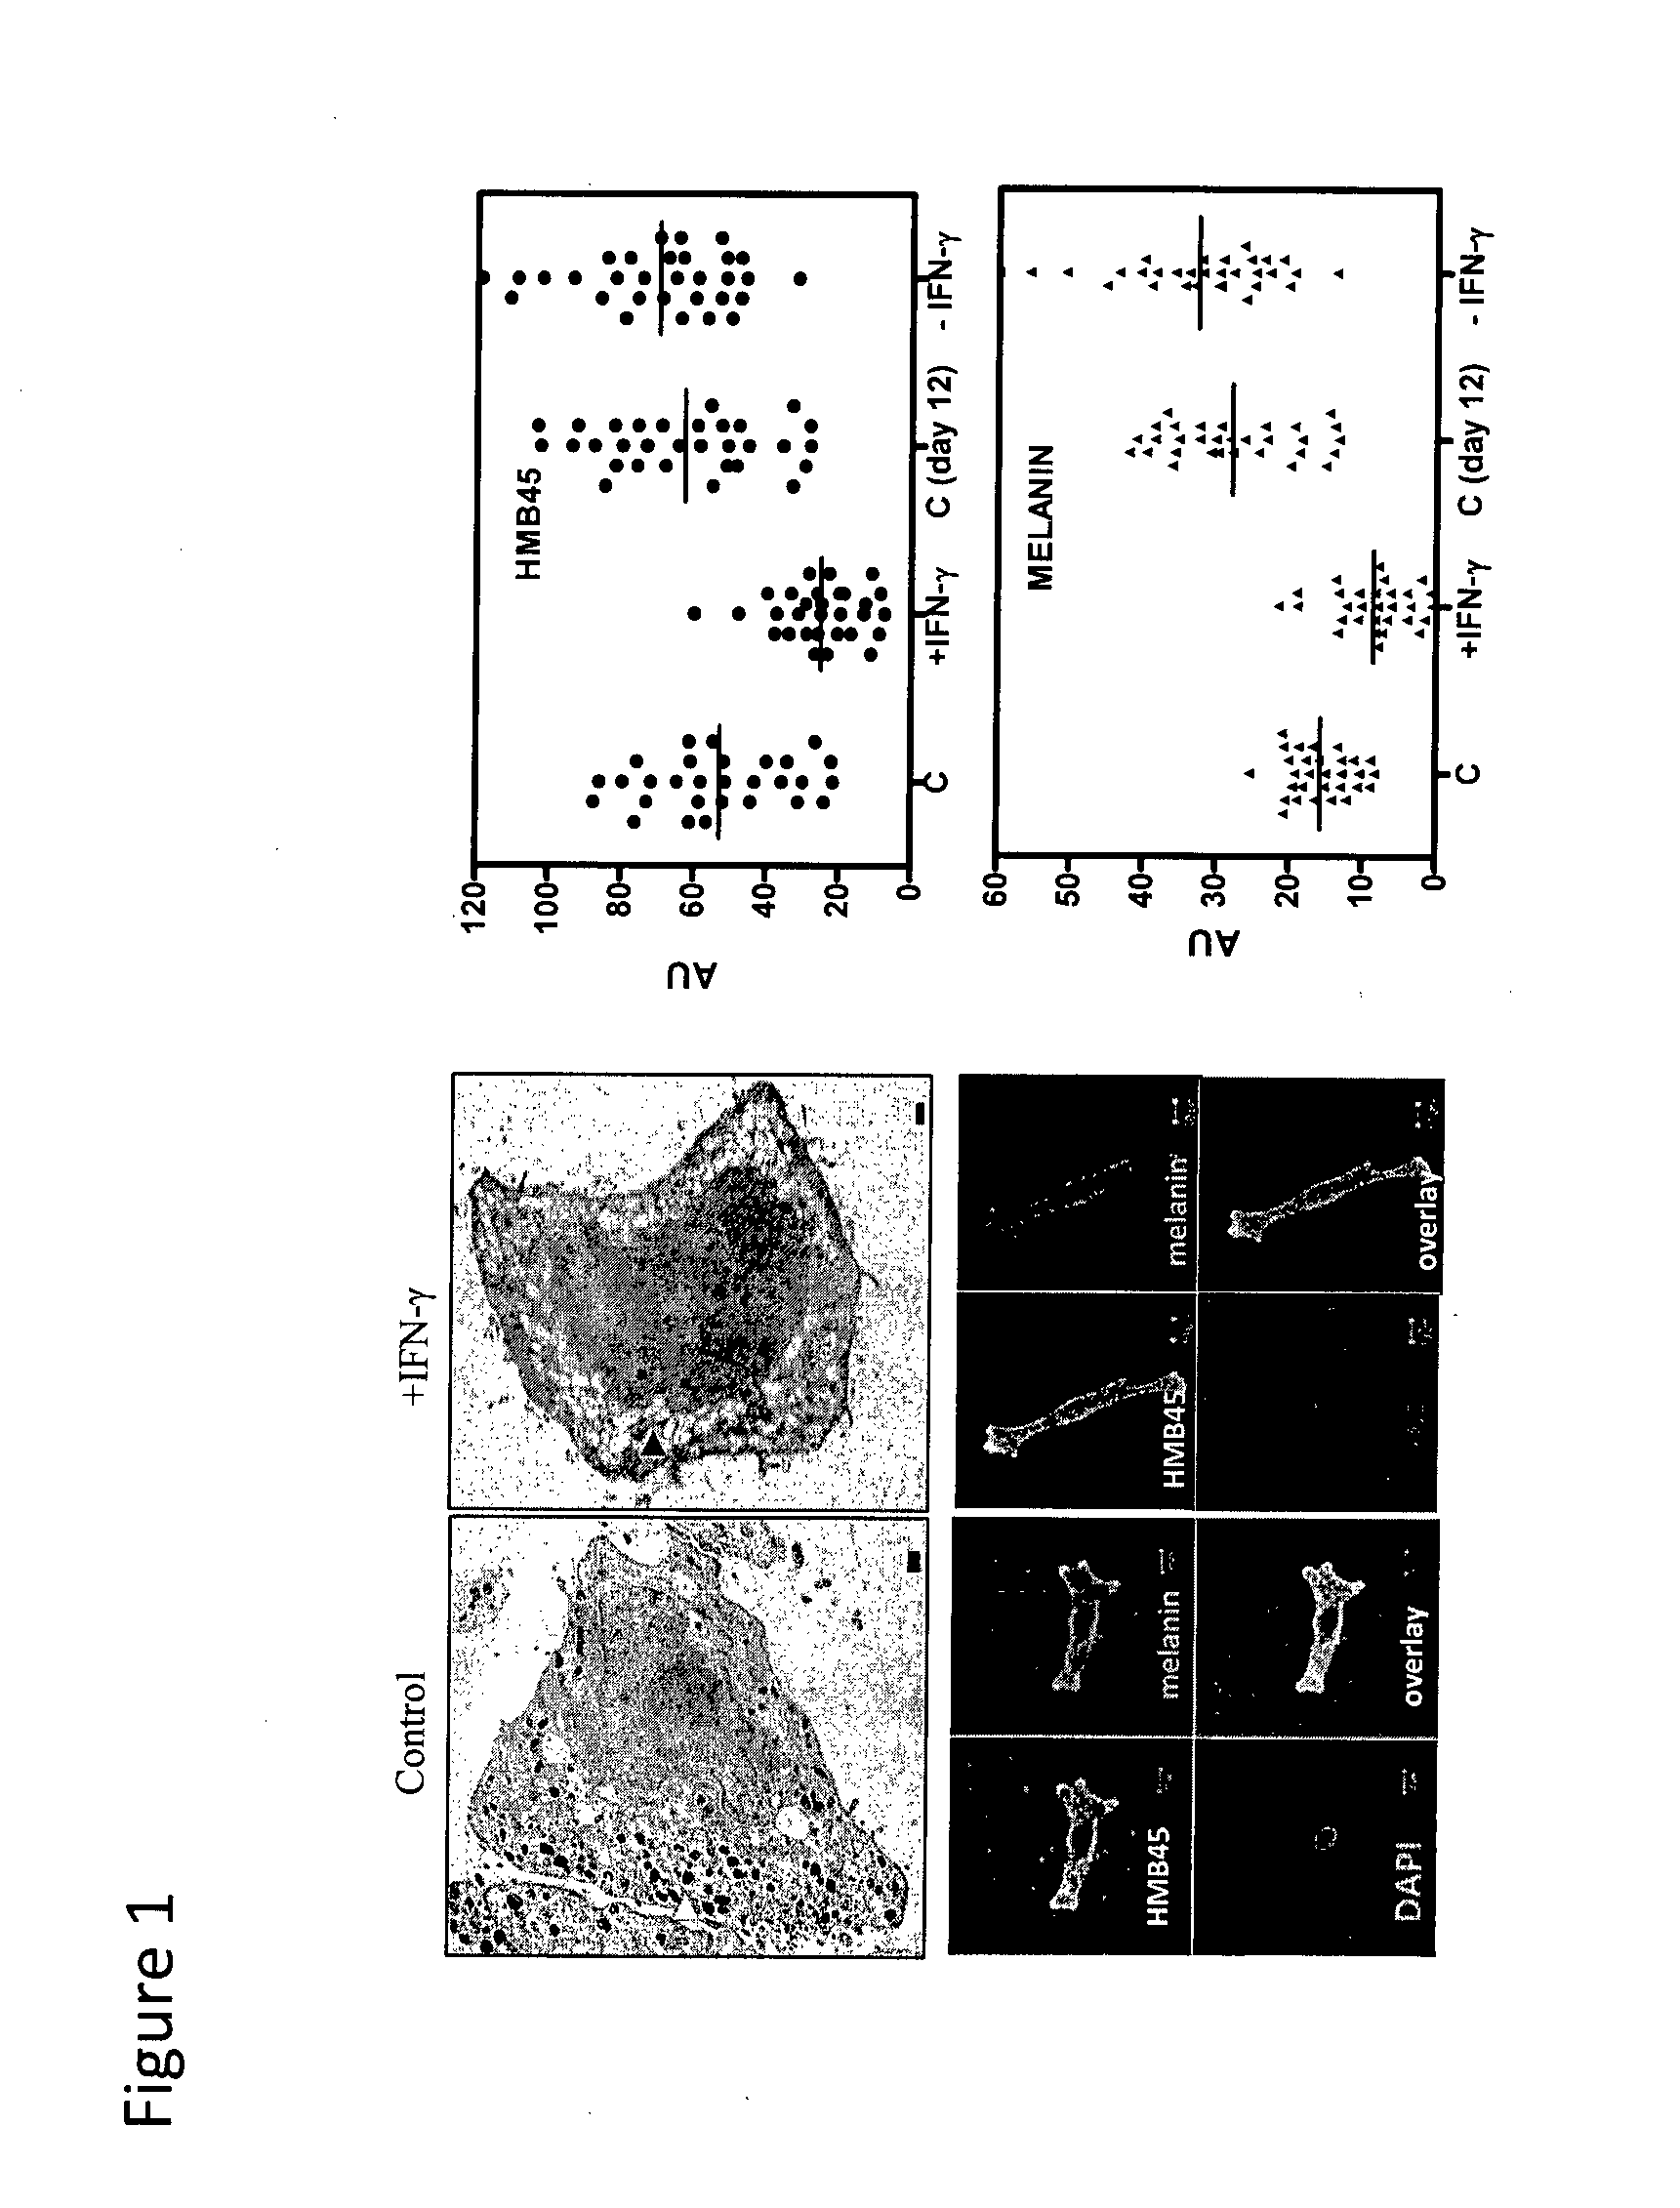 Method to modulate pigmentation process in the melanocytes of skin